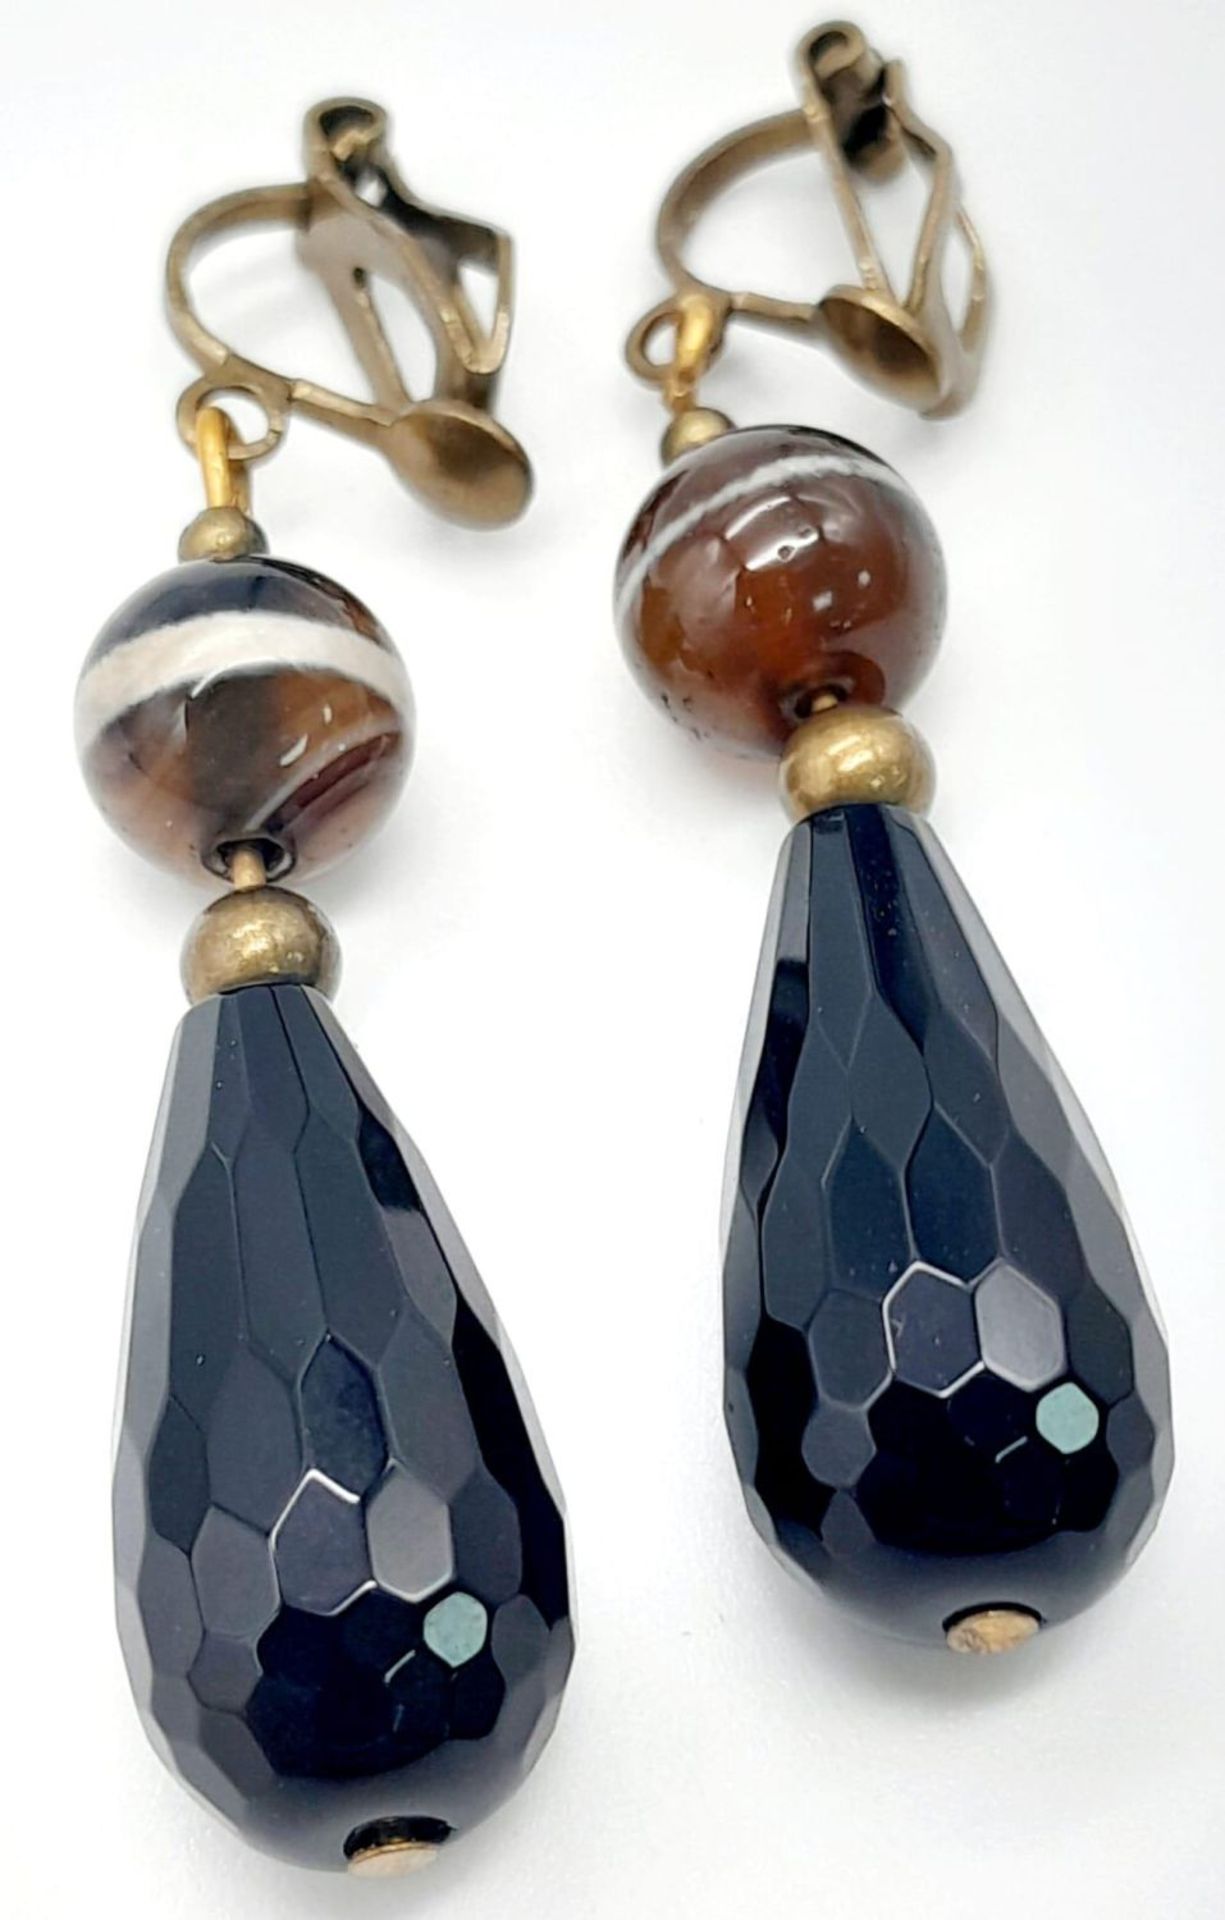 A Pair of Banded Agate and Jet Drop Earrings. 4cm drop. - Image 2 of 5